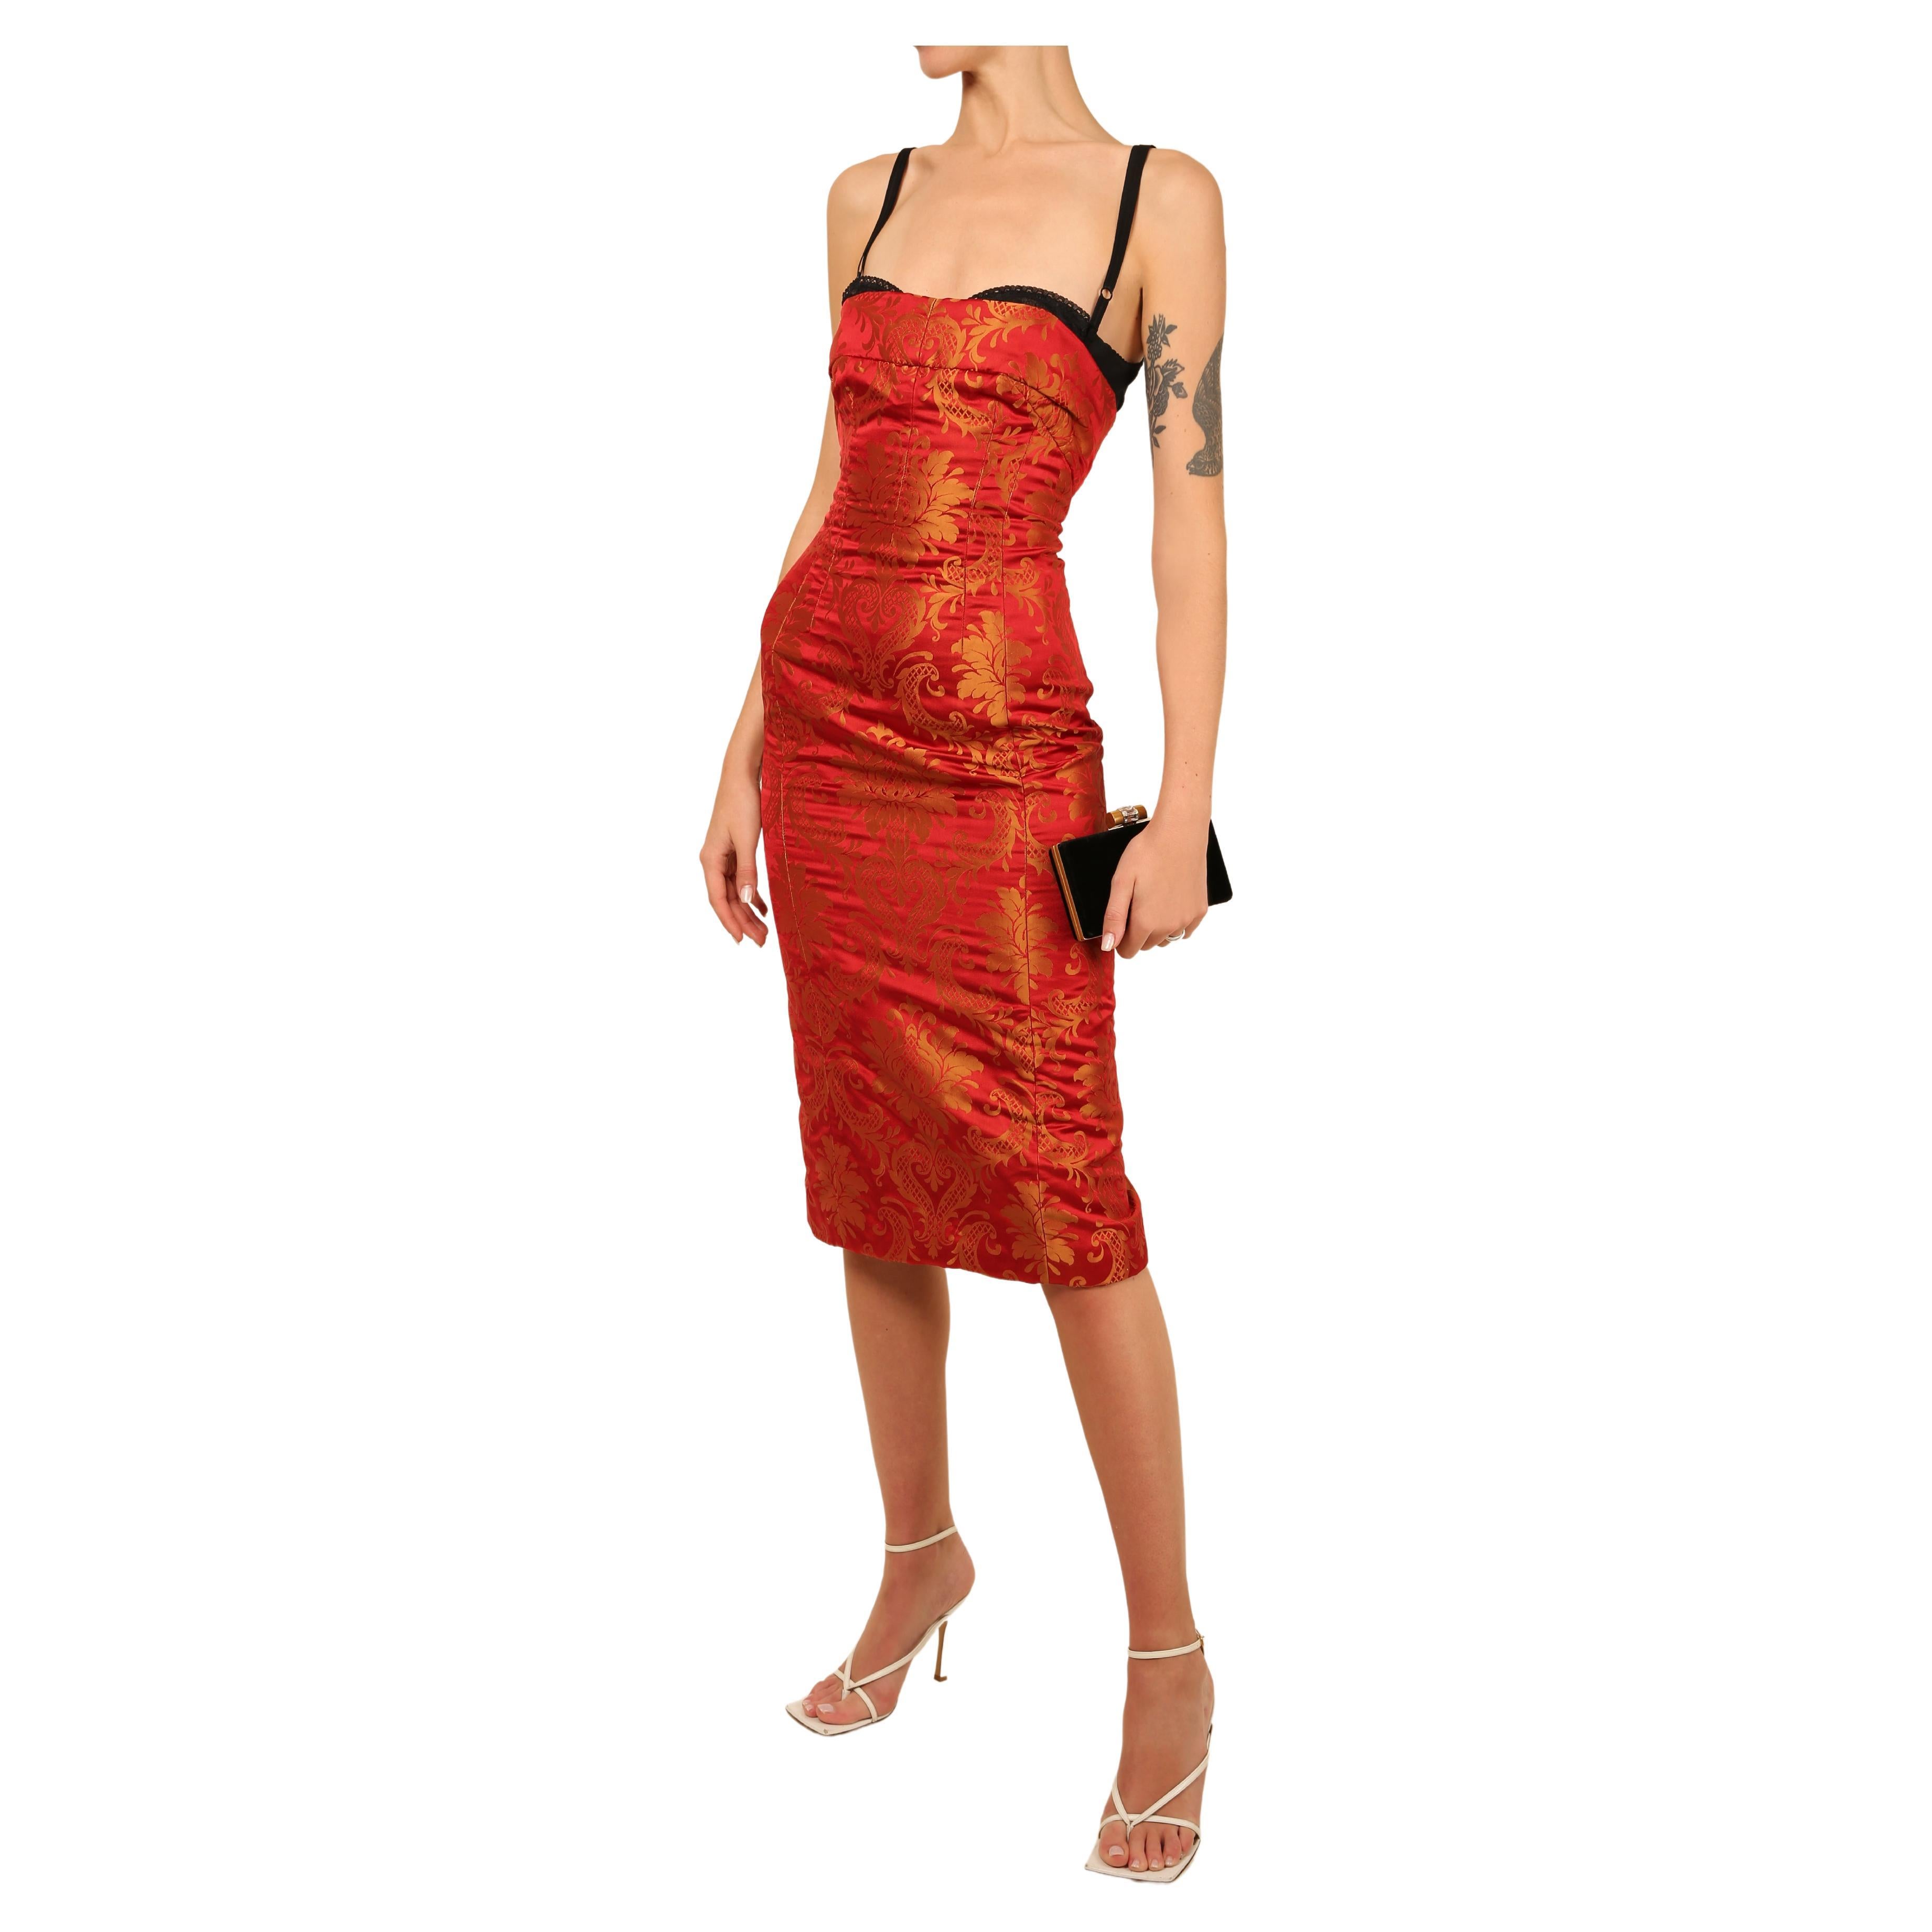 Dolce & Gabbana red gold floral print oriental asian style bustier midi dress For Sale